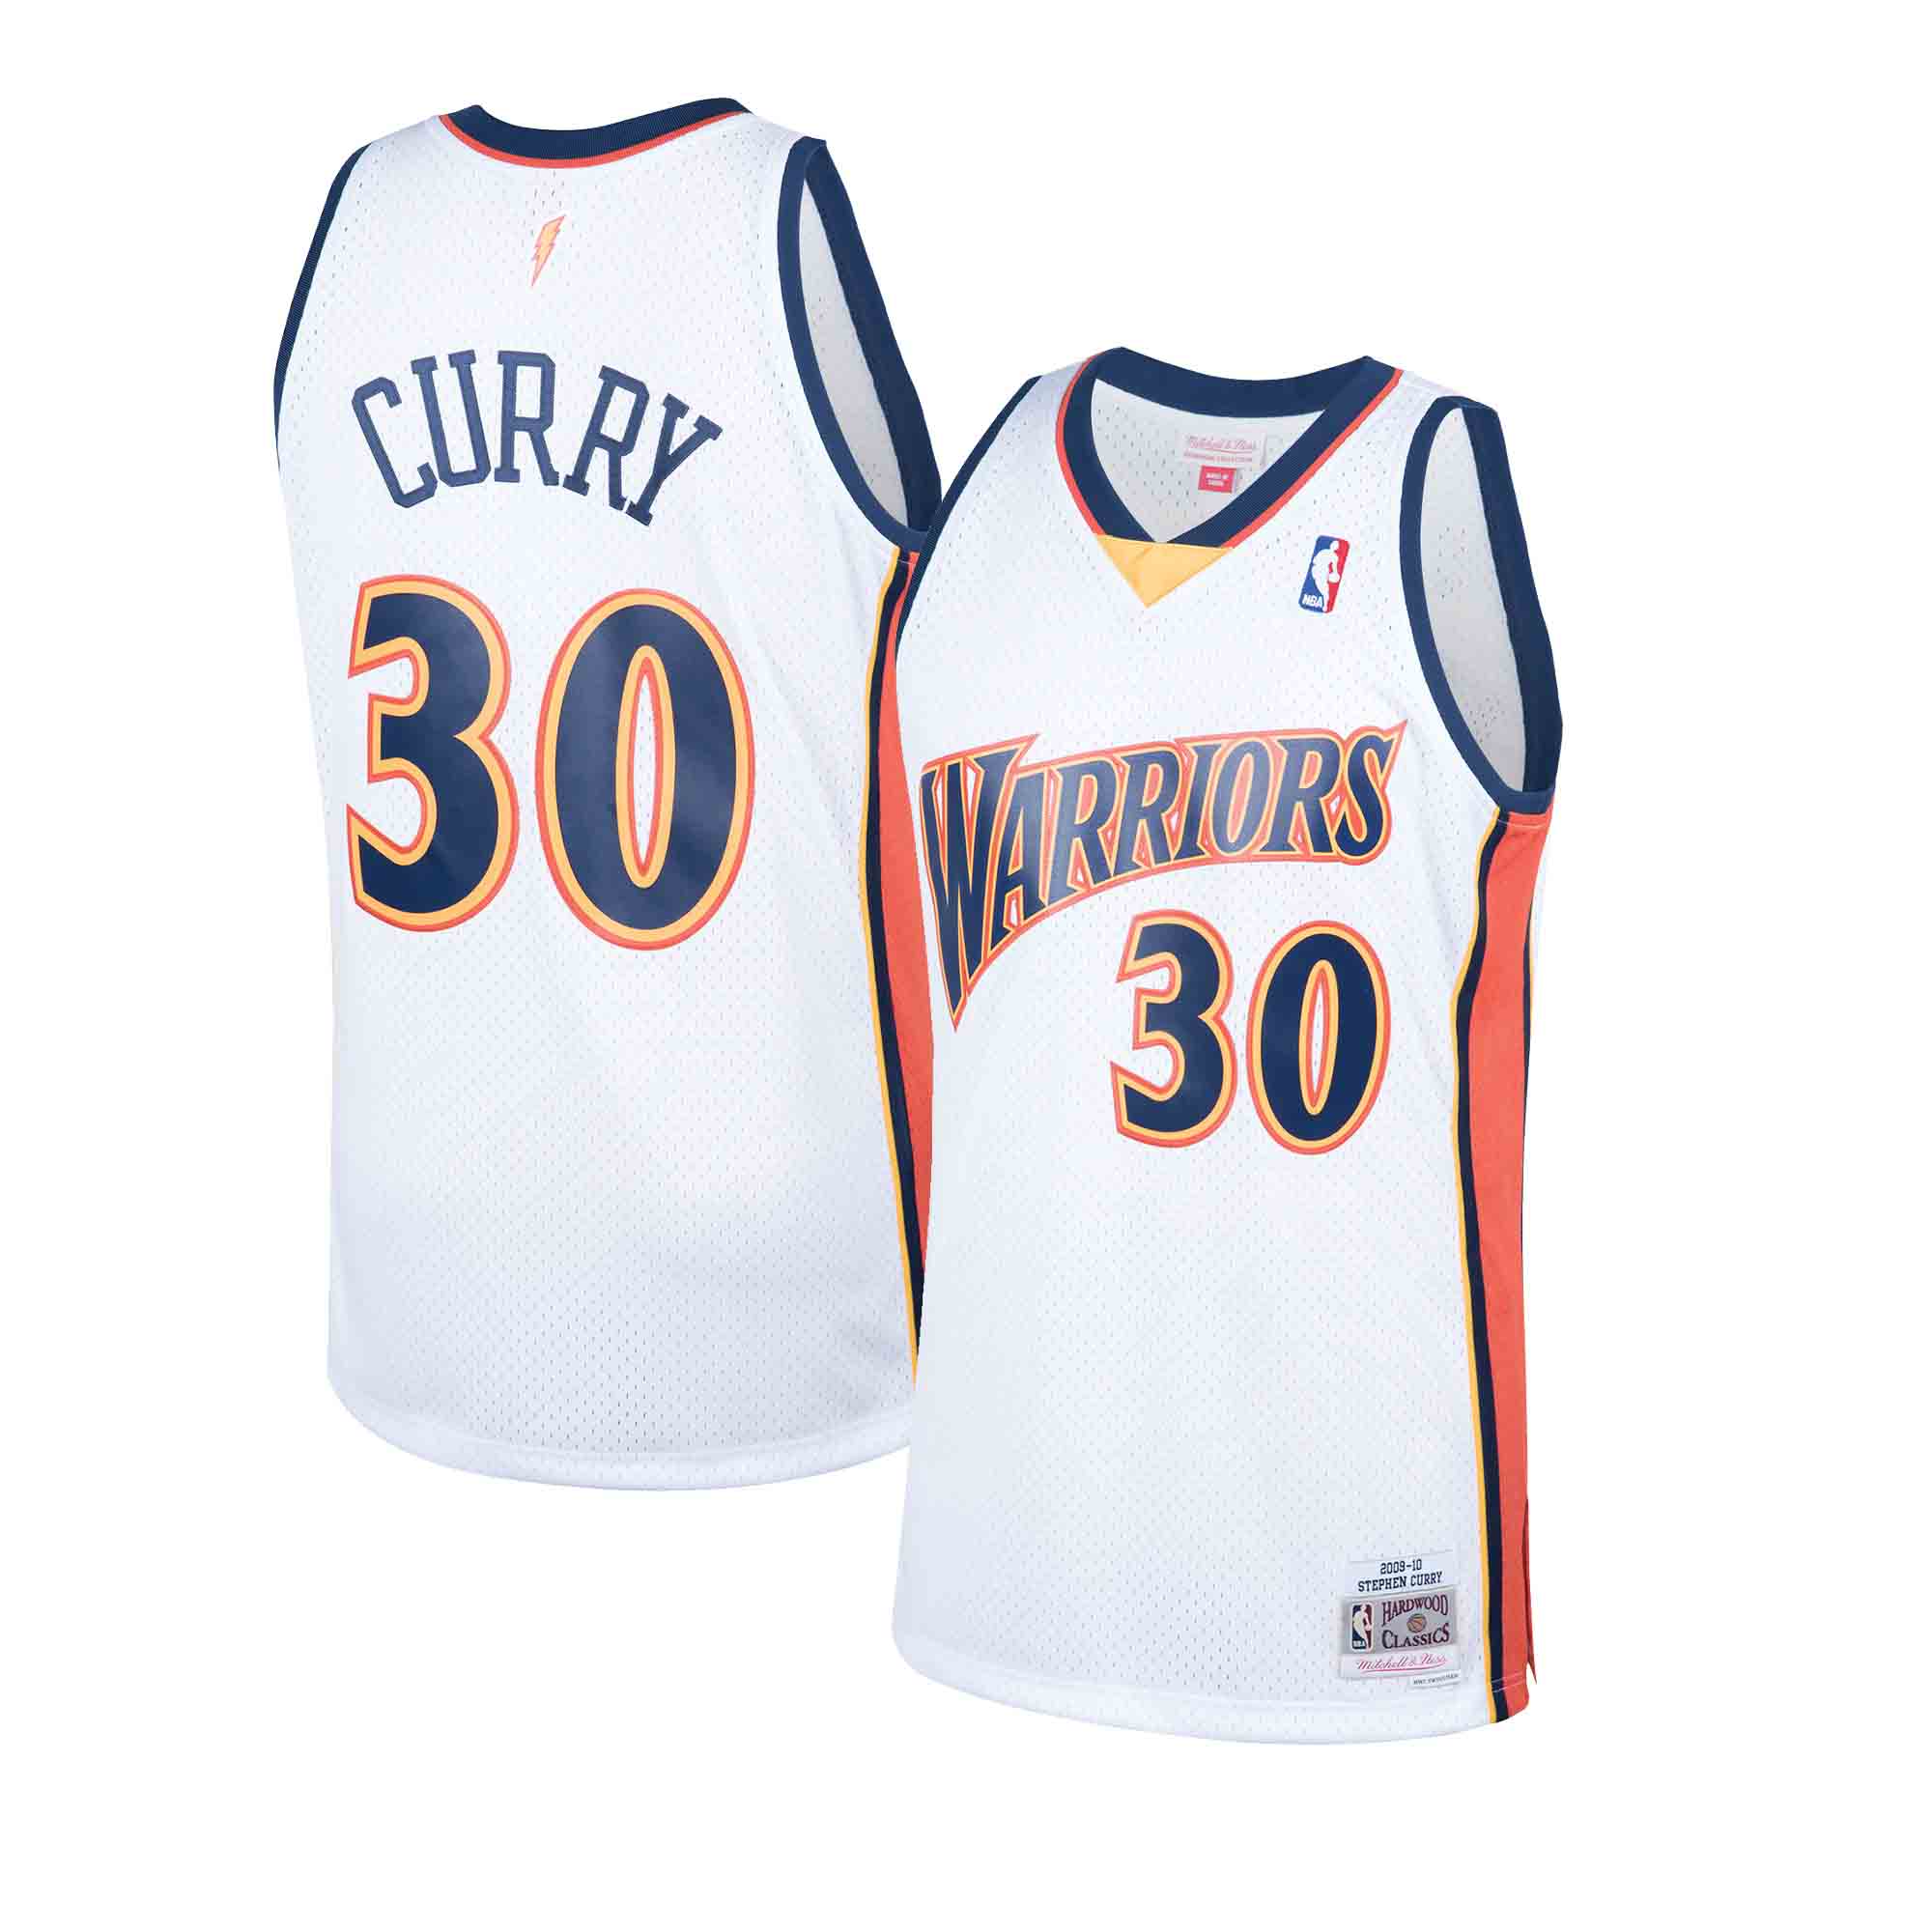 Stephen Curry 30 Golden State Warriors Pure Shooter Tank Reversible Jersey